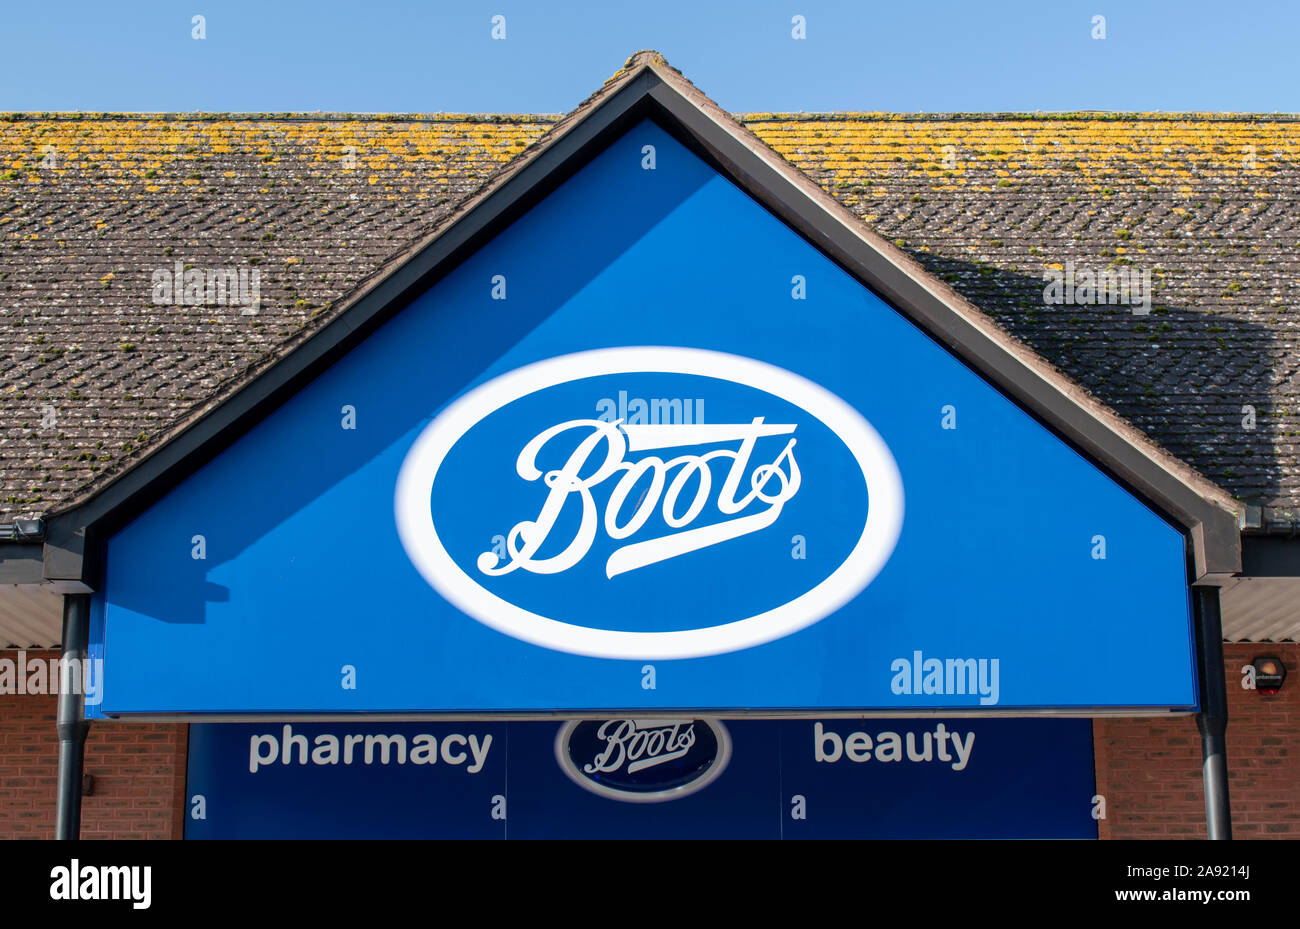 Page 3 - Boots Pharmacy High Resolution Stock Photography and Images - Alamy